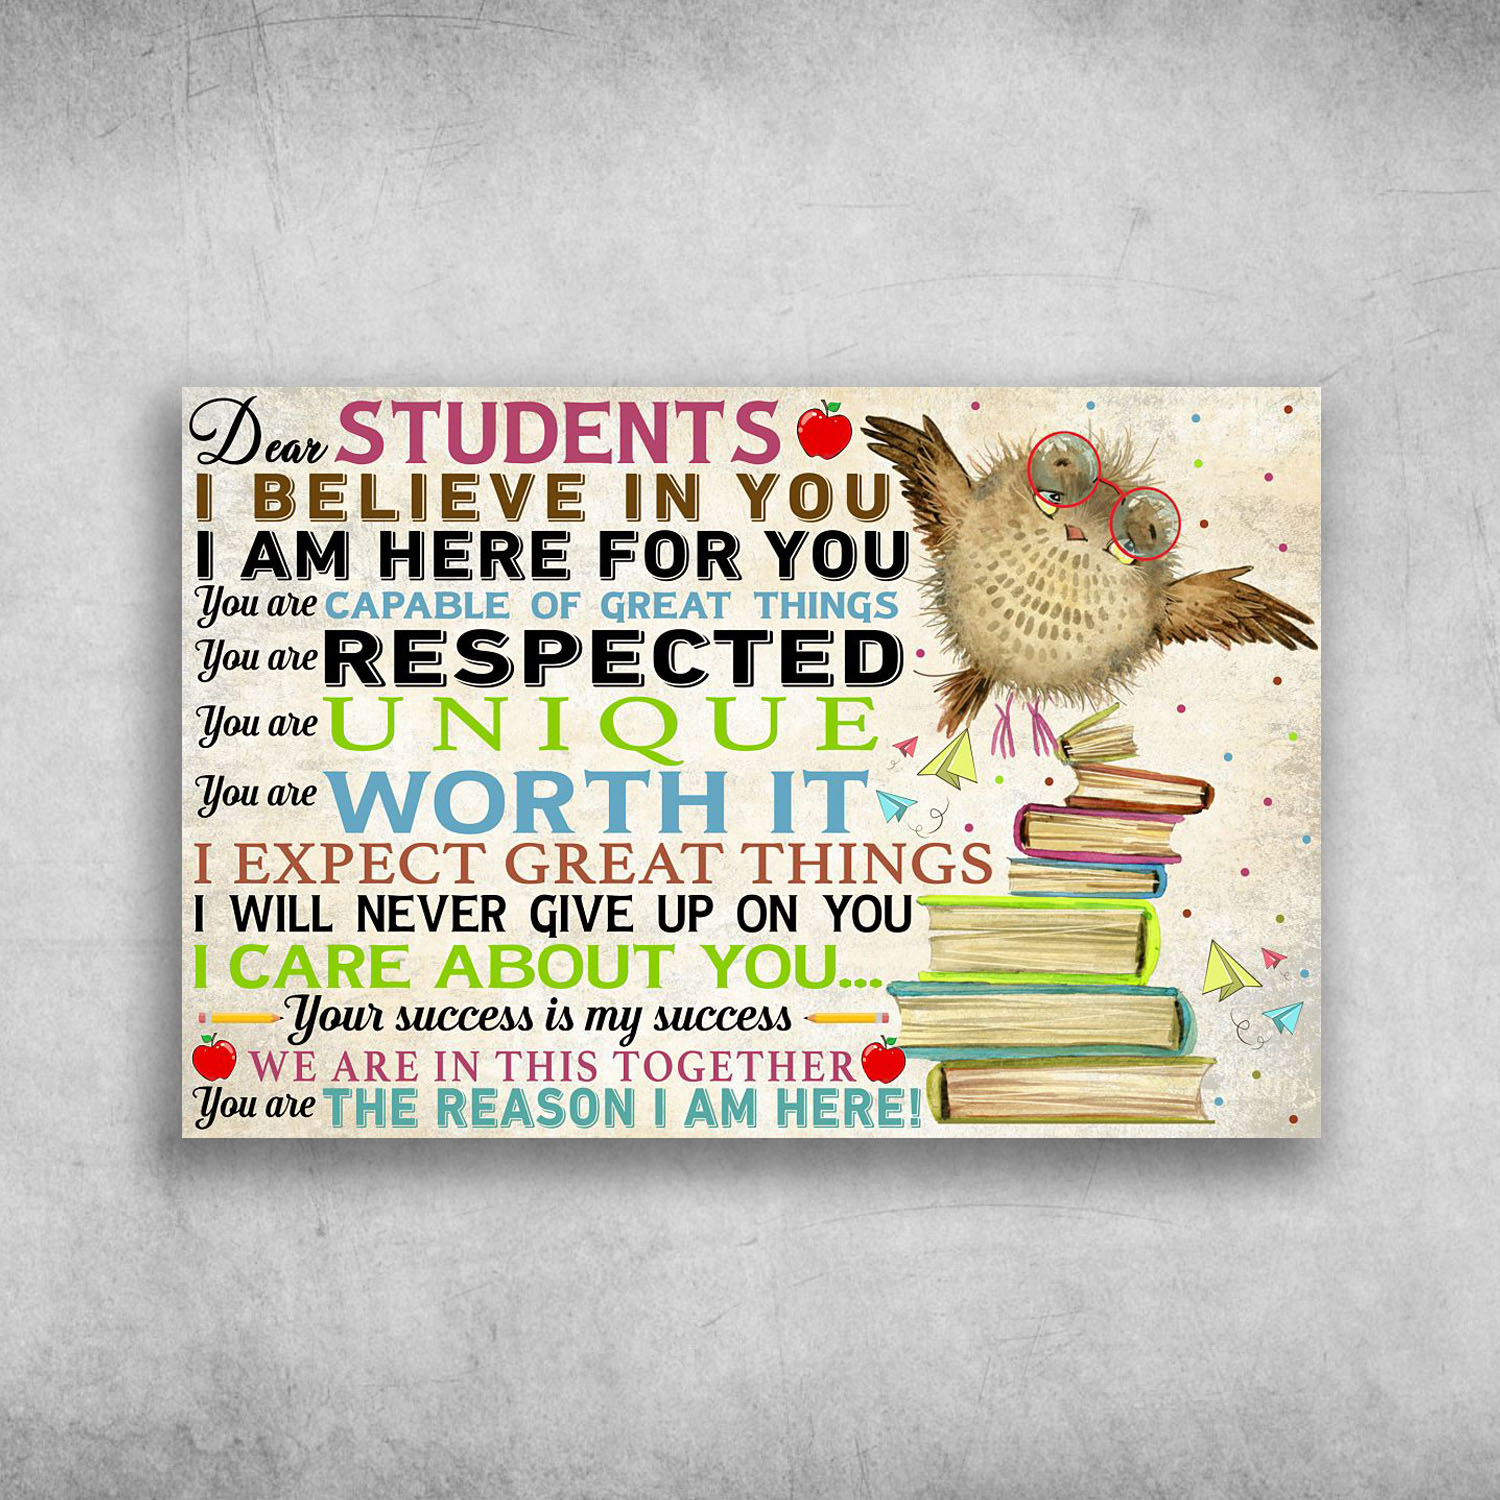 Dear Students I Believe In You I Am Here For You (2)